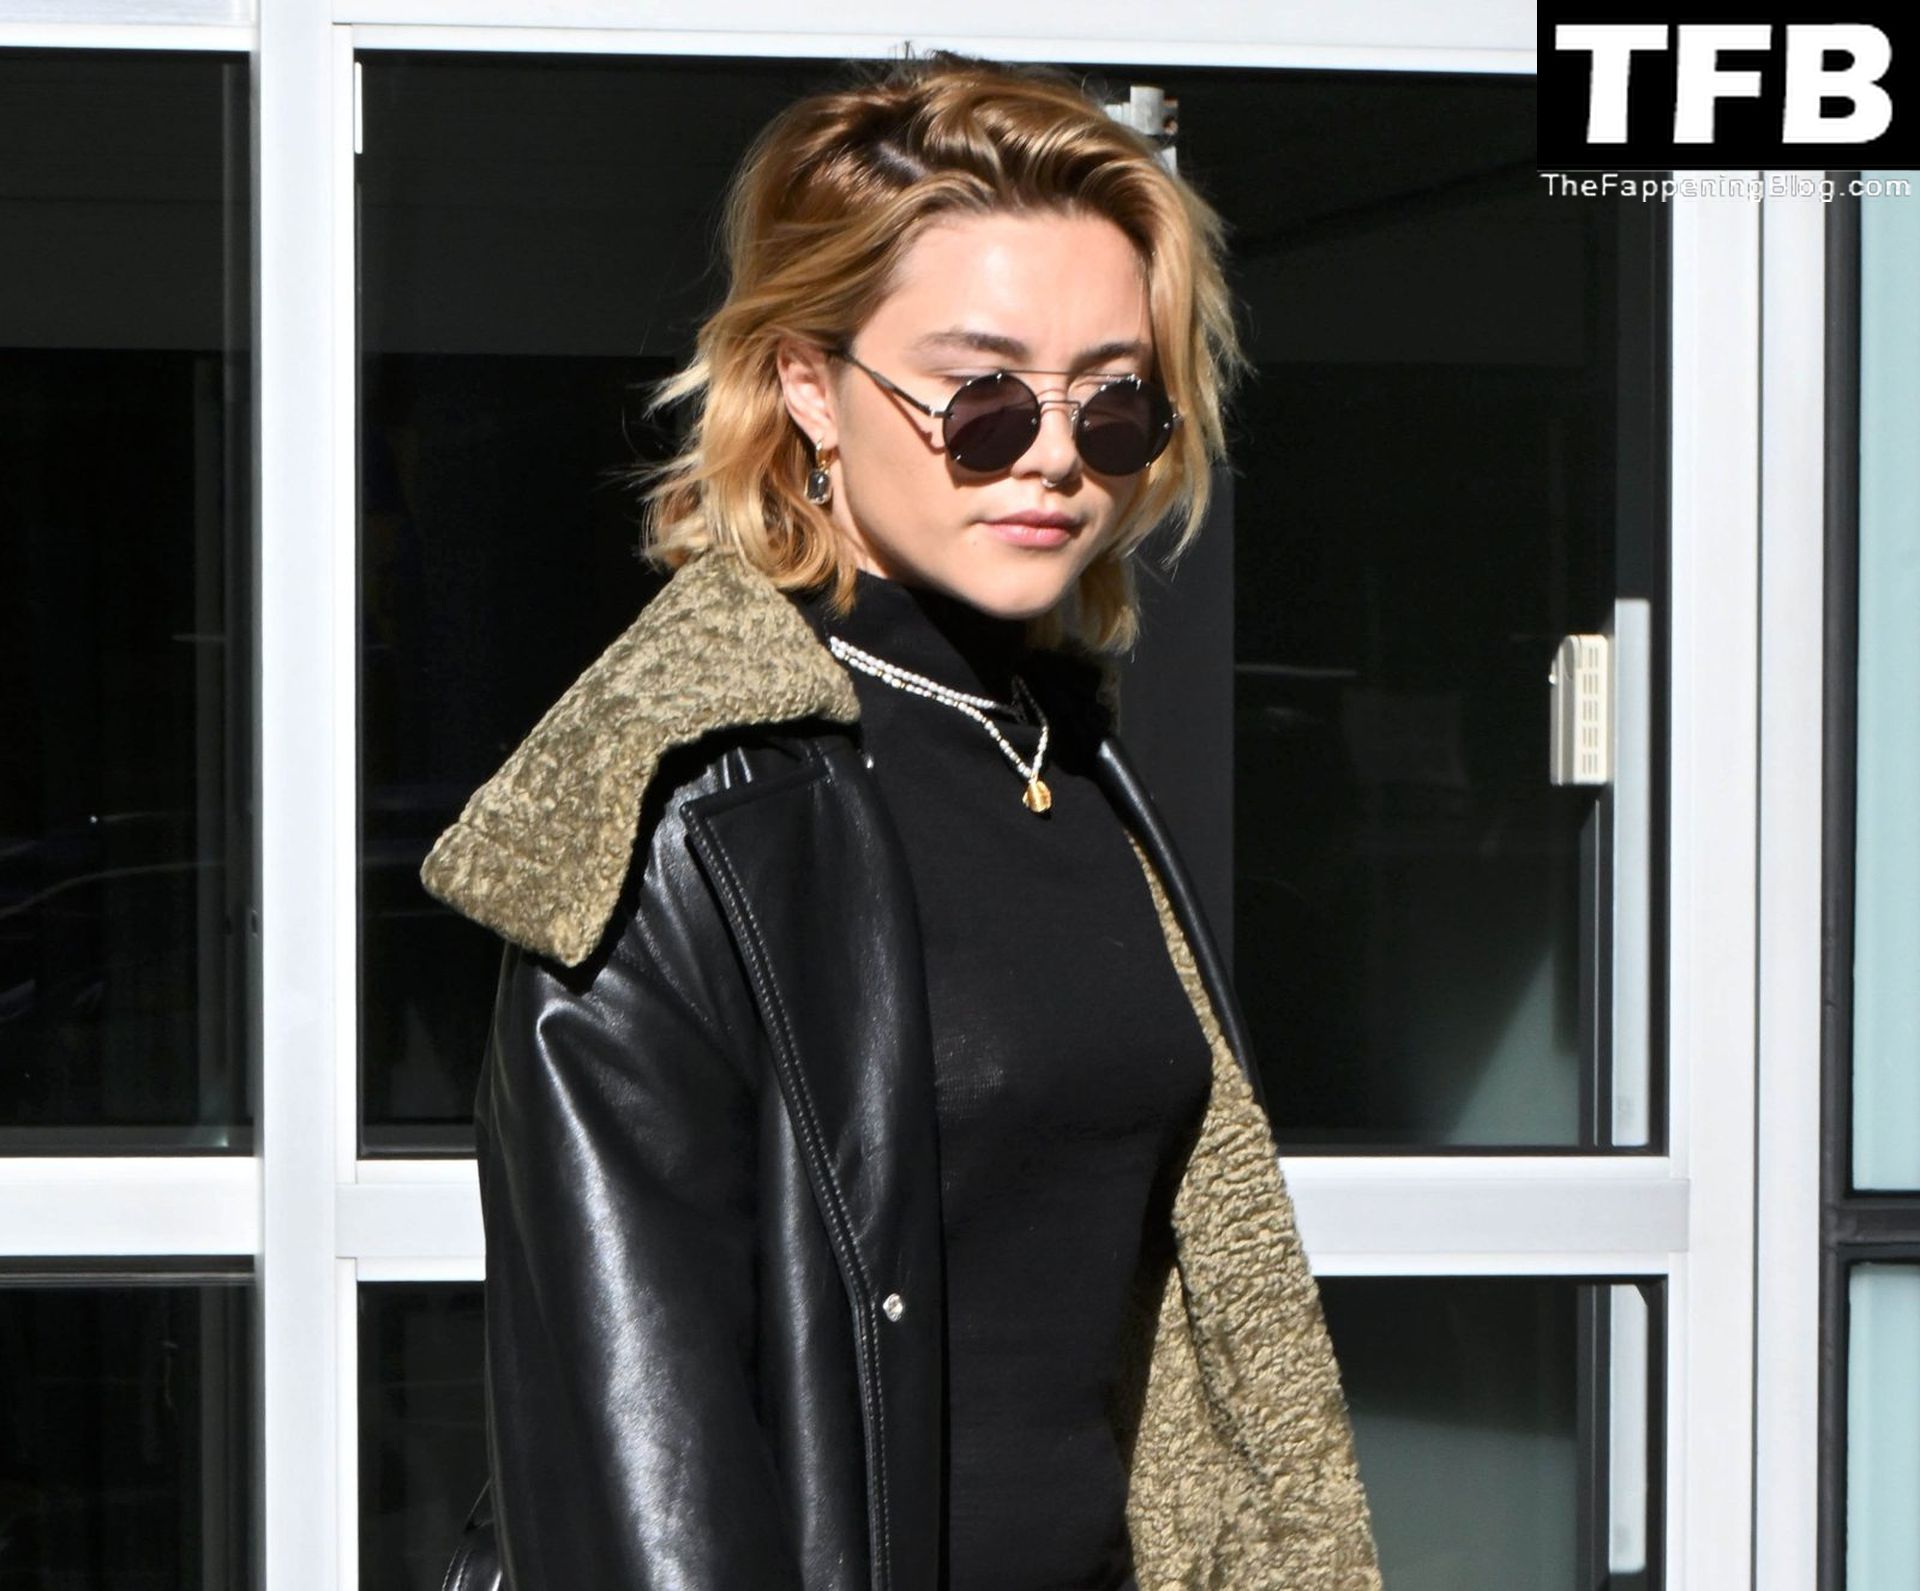 Florence Pugh Pokies The Fappening Blog 24 - Florence Pugh Shows Off Her Pokies at JFK airport in NYC (31 Photos)